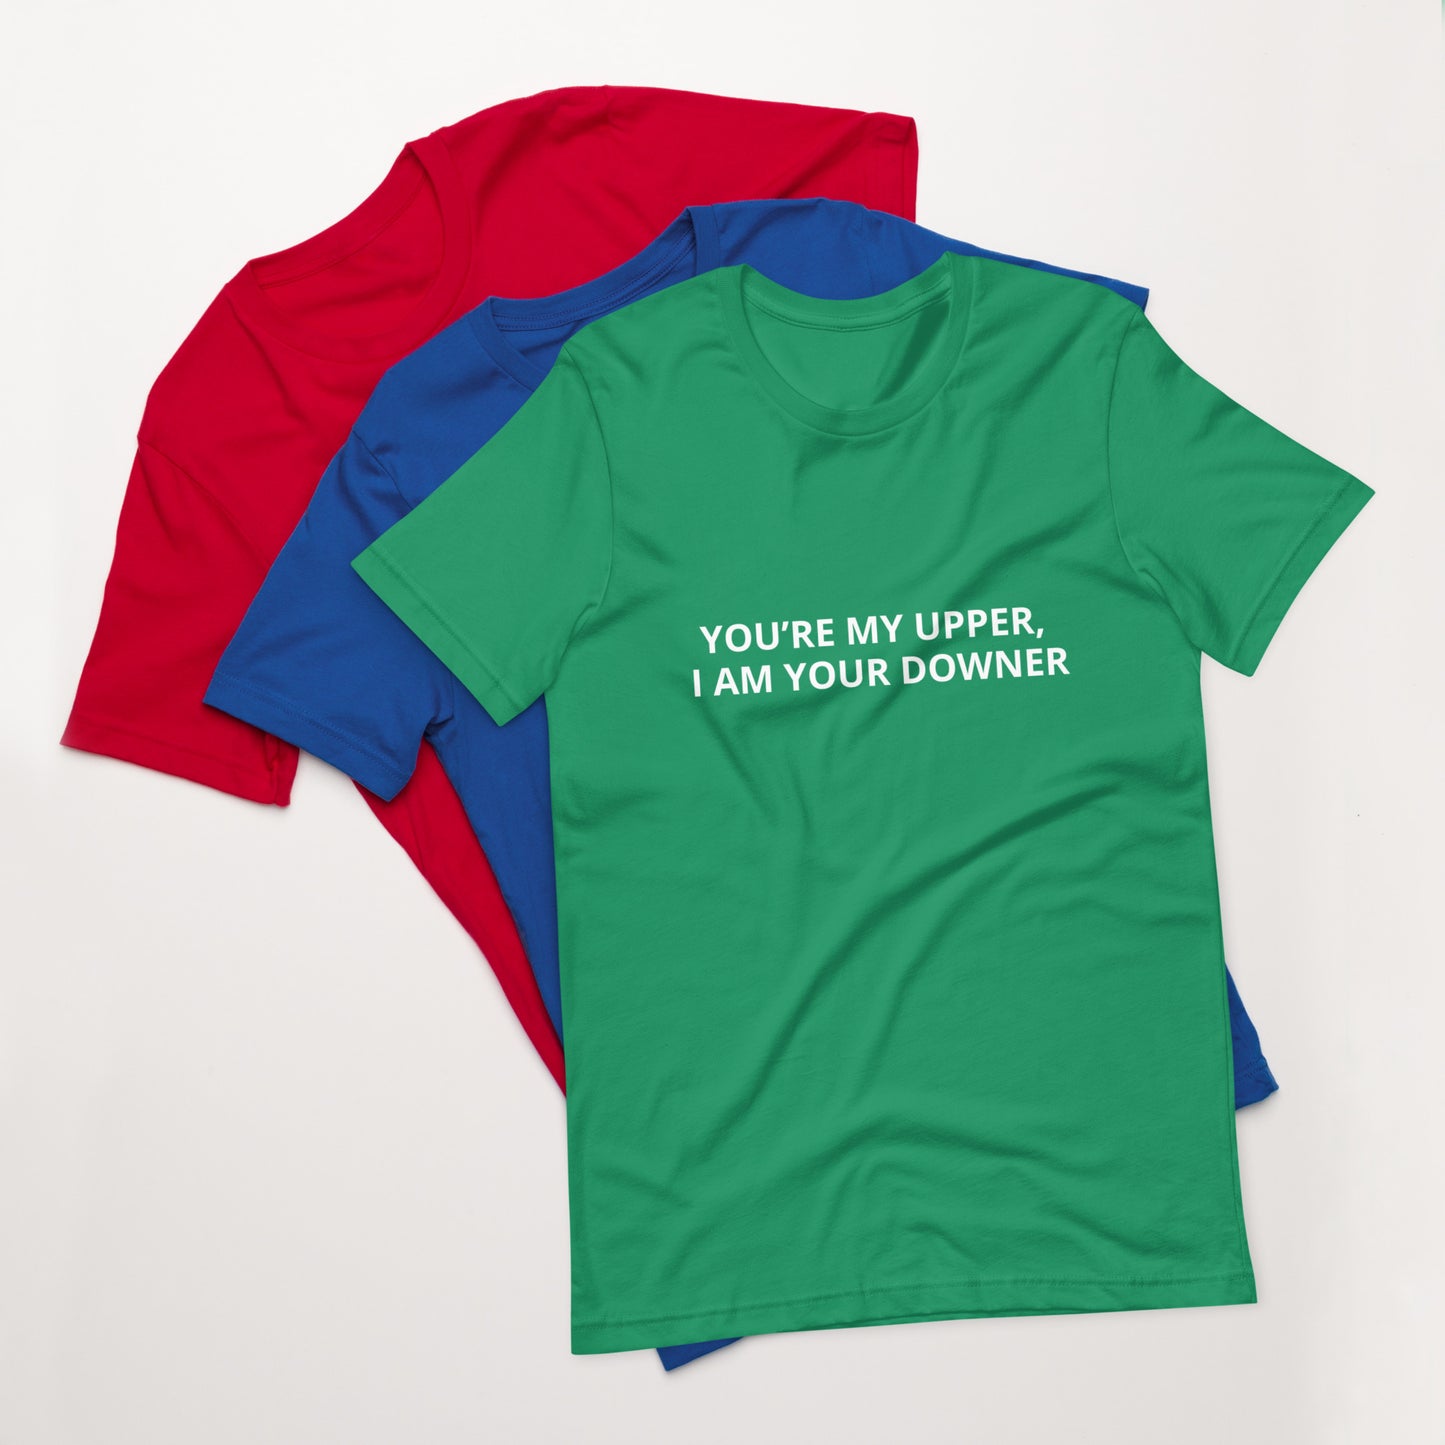 YOU’RE MY UPPER, I AM YOUR DOWNER  Unisex t-shirt